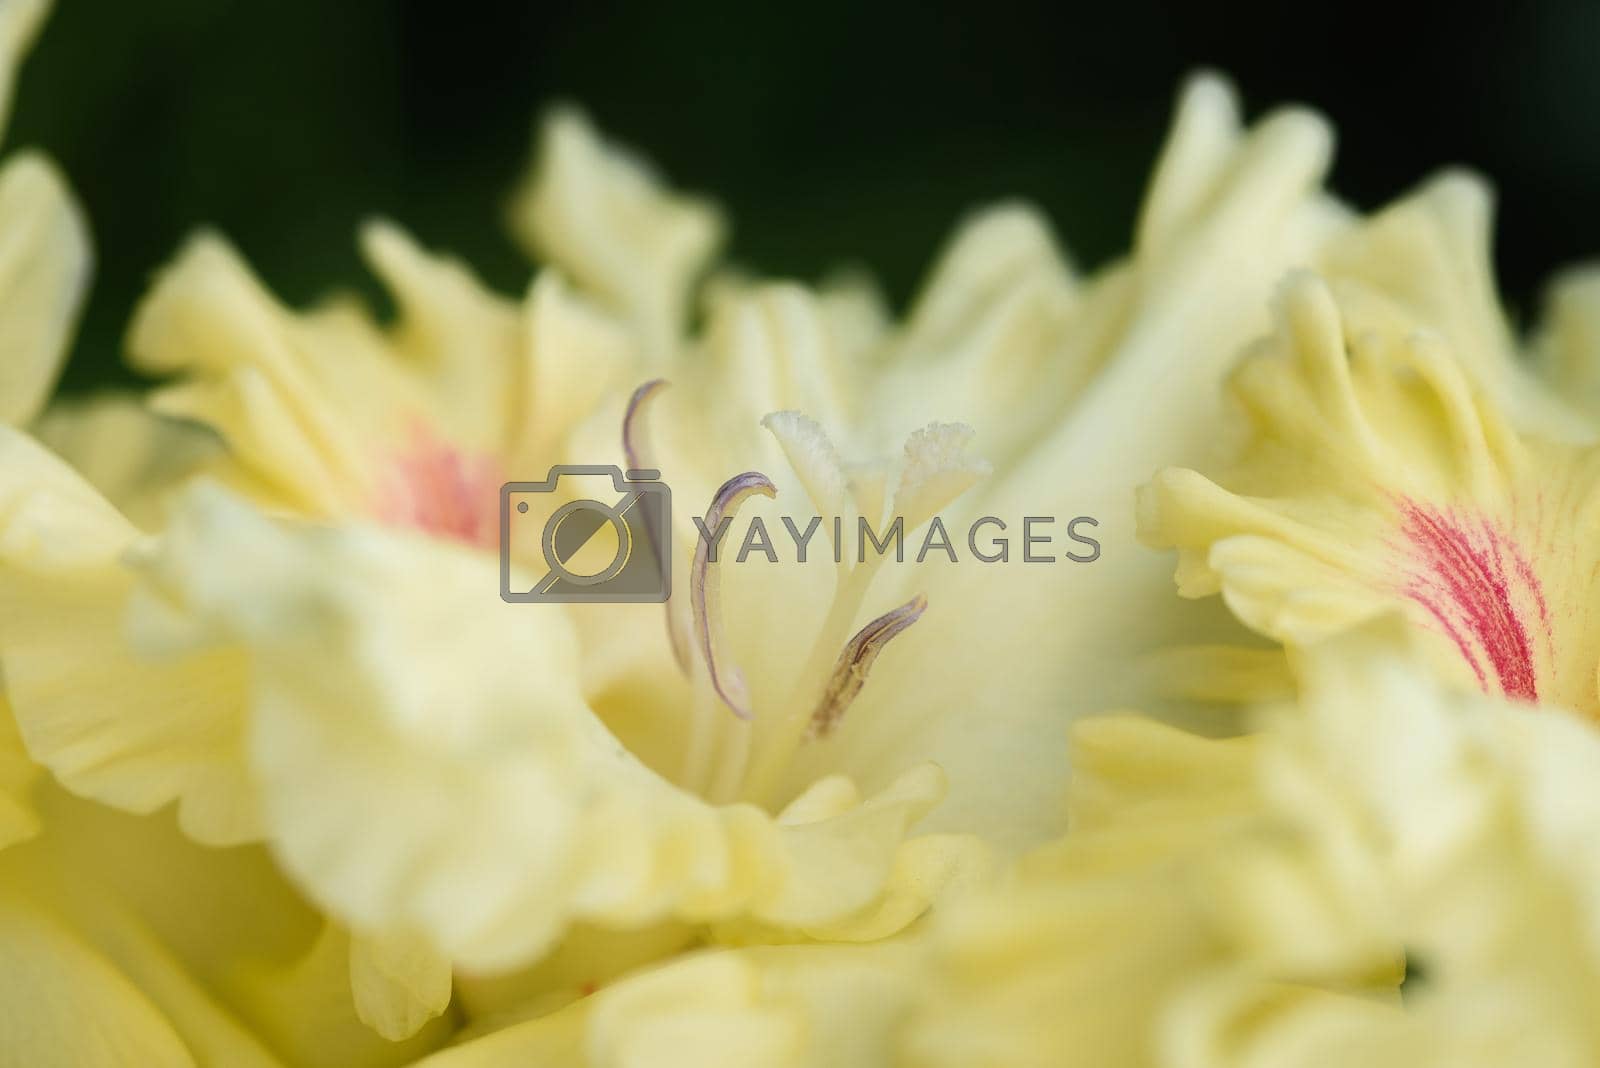 Royalty free image of Gladiolus inflorescence with pistils and stamens in detail  by oracal